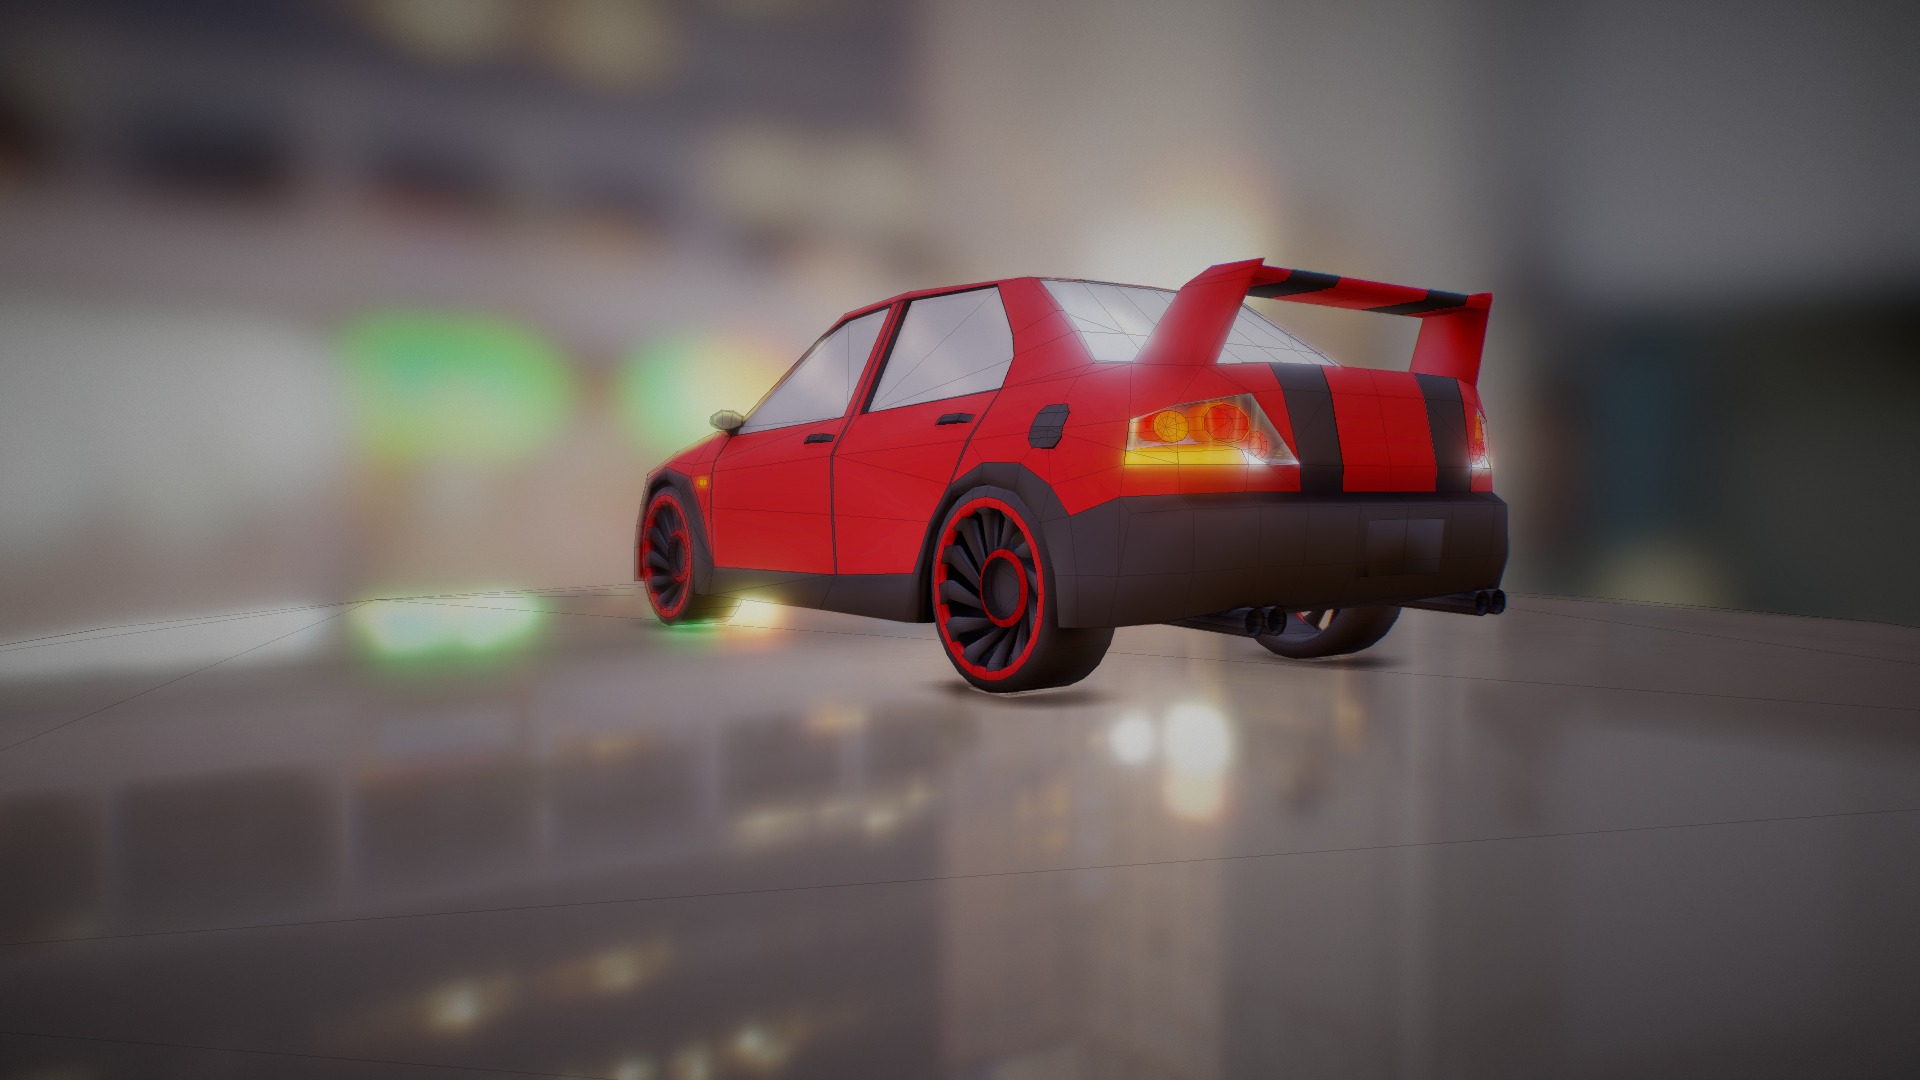 3D model LANCER EVO LOWPOLY - This is a 3D model of the LANCER EVO LOWPOLY. The 3D model is about a red car on a road.